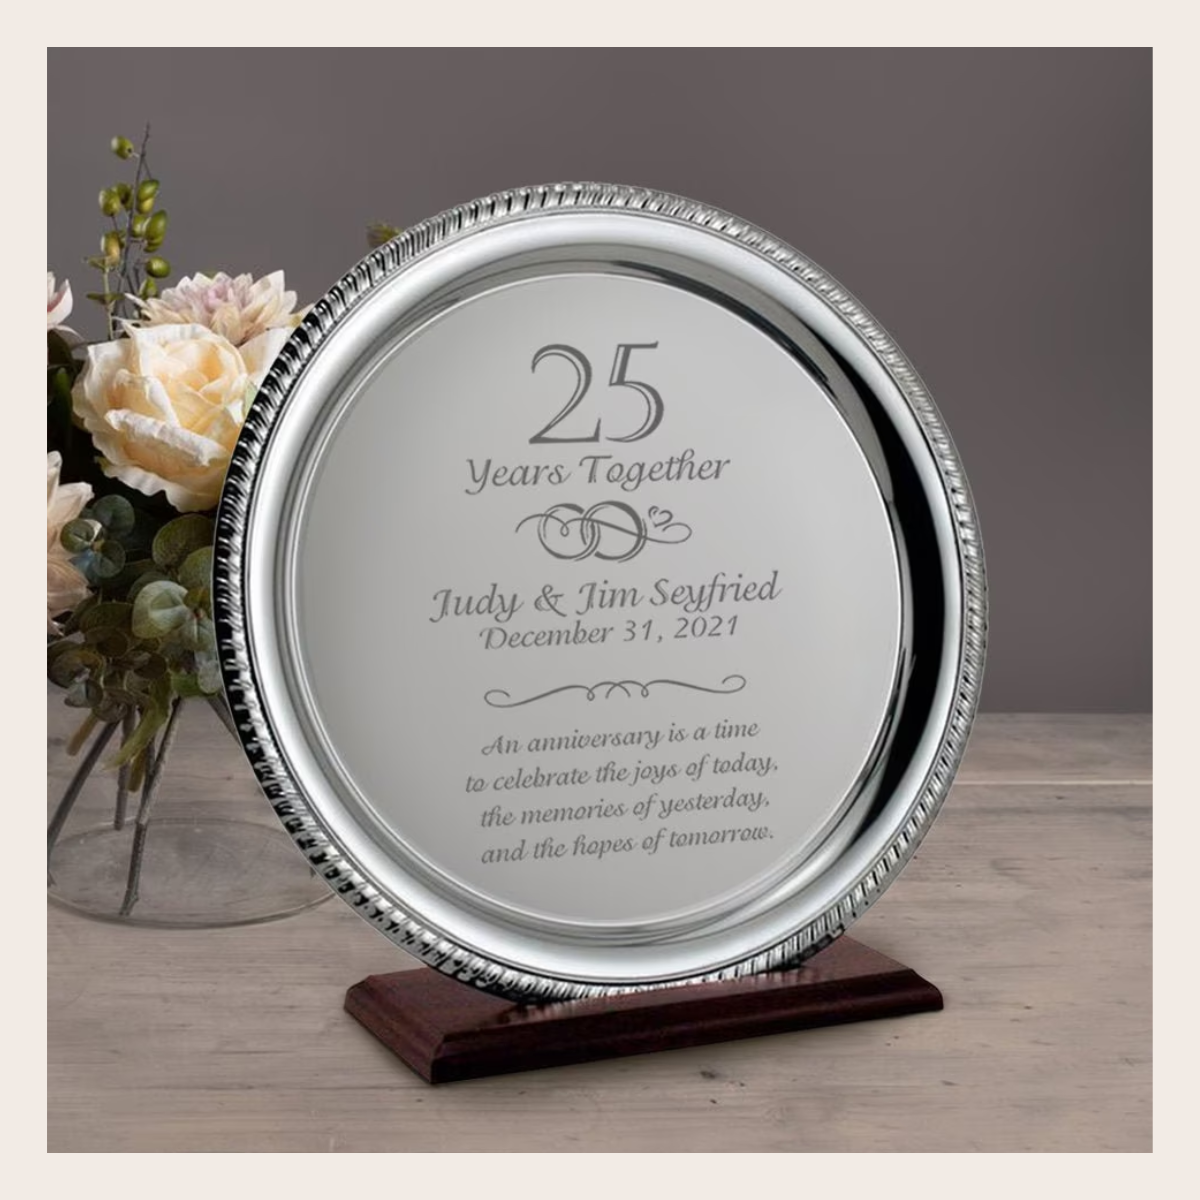 Amazon.com : SOUSYOKYO 25th Anniversary Card Gifts for Husband Men Him,  Personalized 25 Year Wedding Anniversary Present Gift for Her Women Wife,  Happy 25th Anniversary Decorations Wallet Card : Office Products